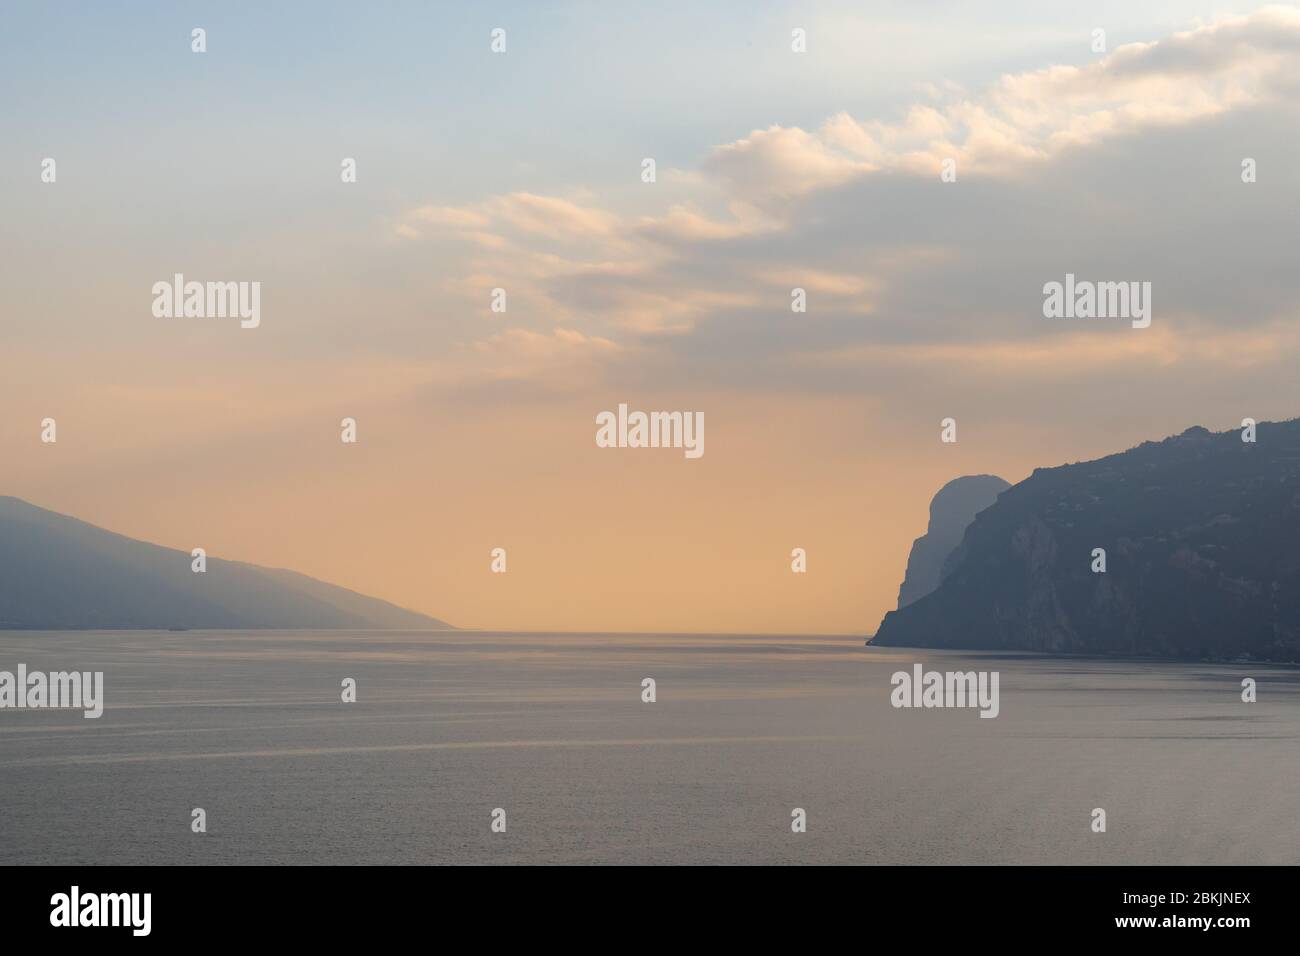 Pastel colors and minimalistic water landscape of lake Garda, northen italy. Autumn evening just after sunset, September 2019. Stock Photo